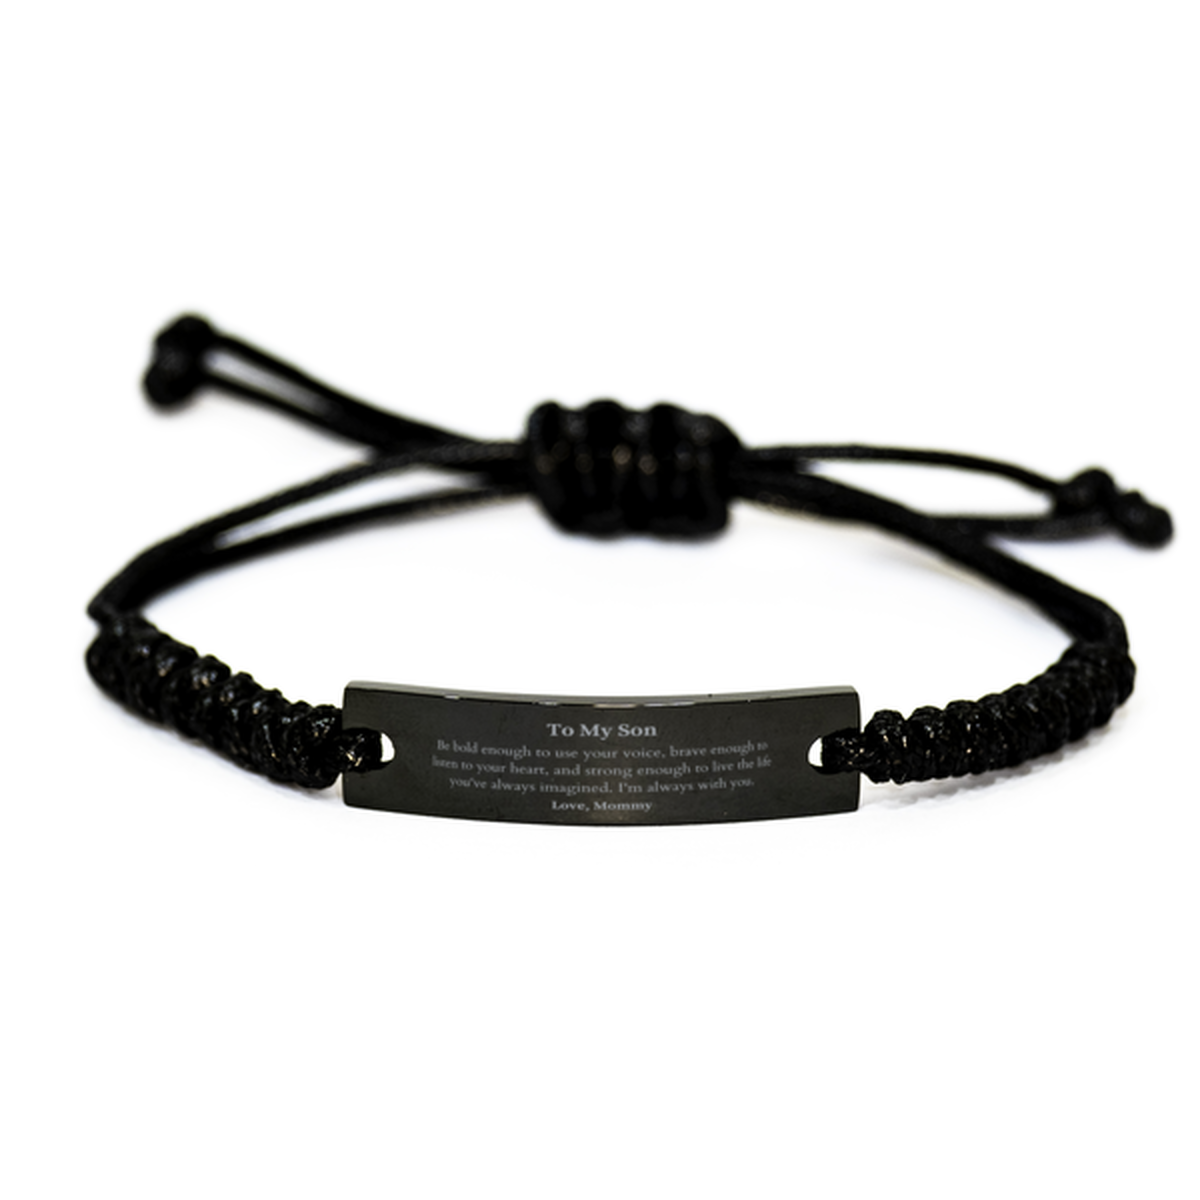 Keepsake Son Black Rope Bracelet Gift Idea Graduation Christmas Birthday Son from Mommy, Son Be bold enough to use your voice, brave enough to listen to your heart. Love, Mommy